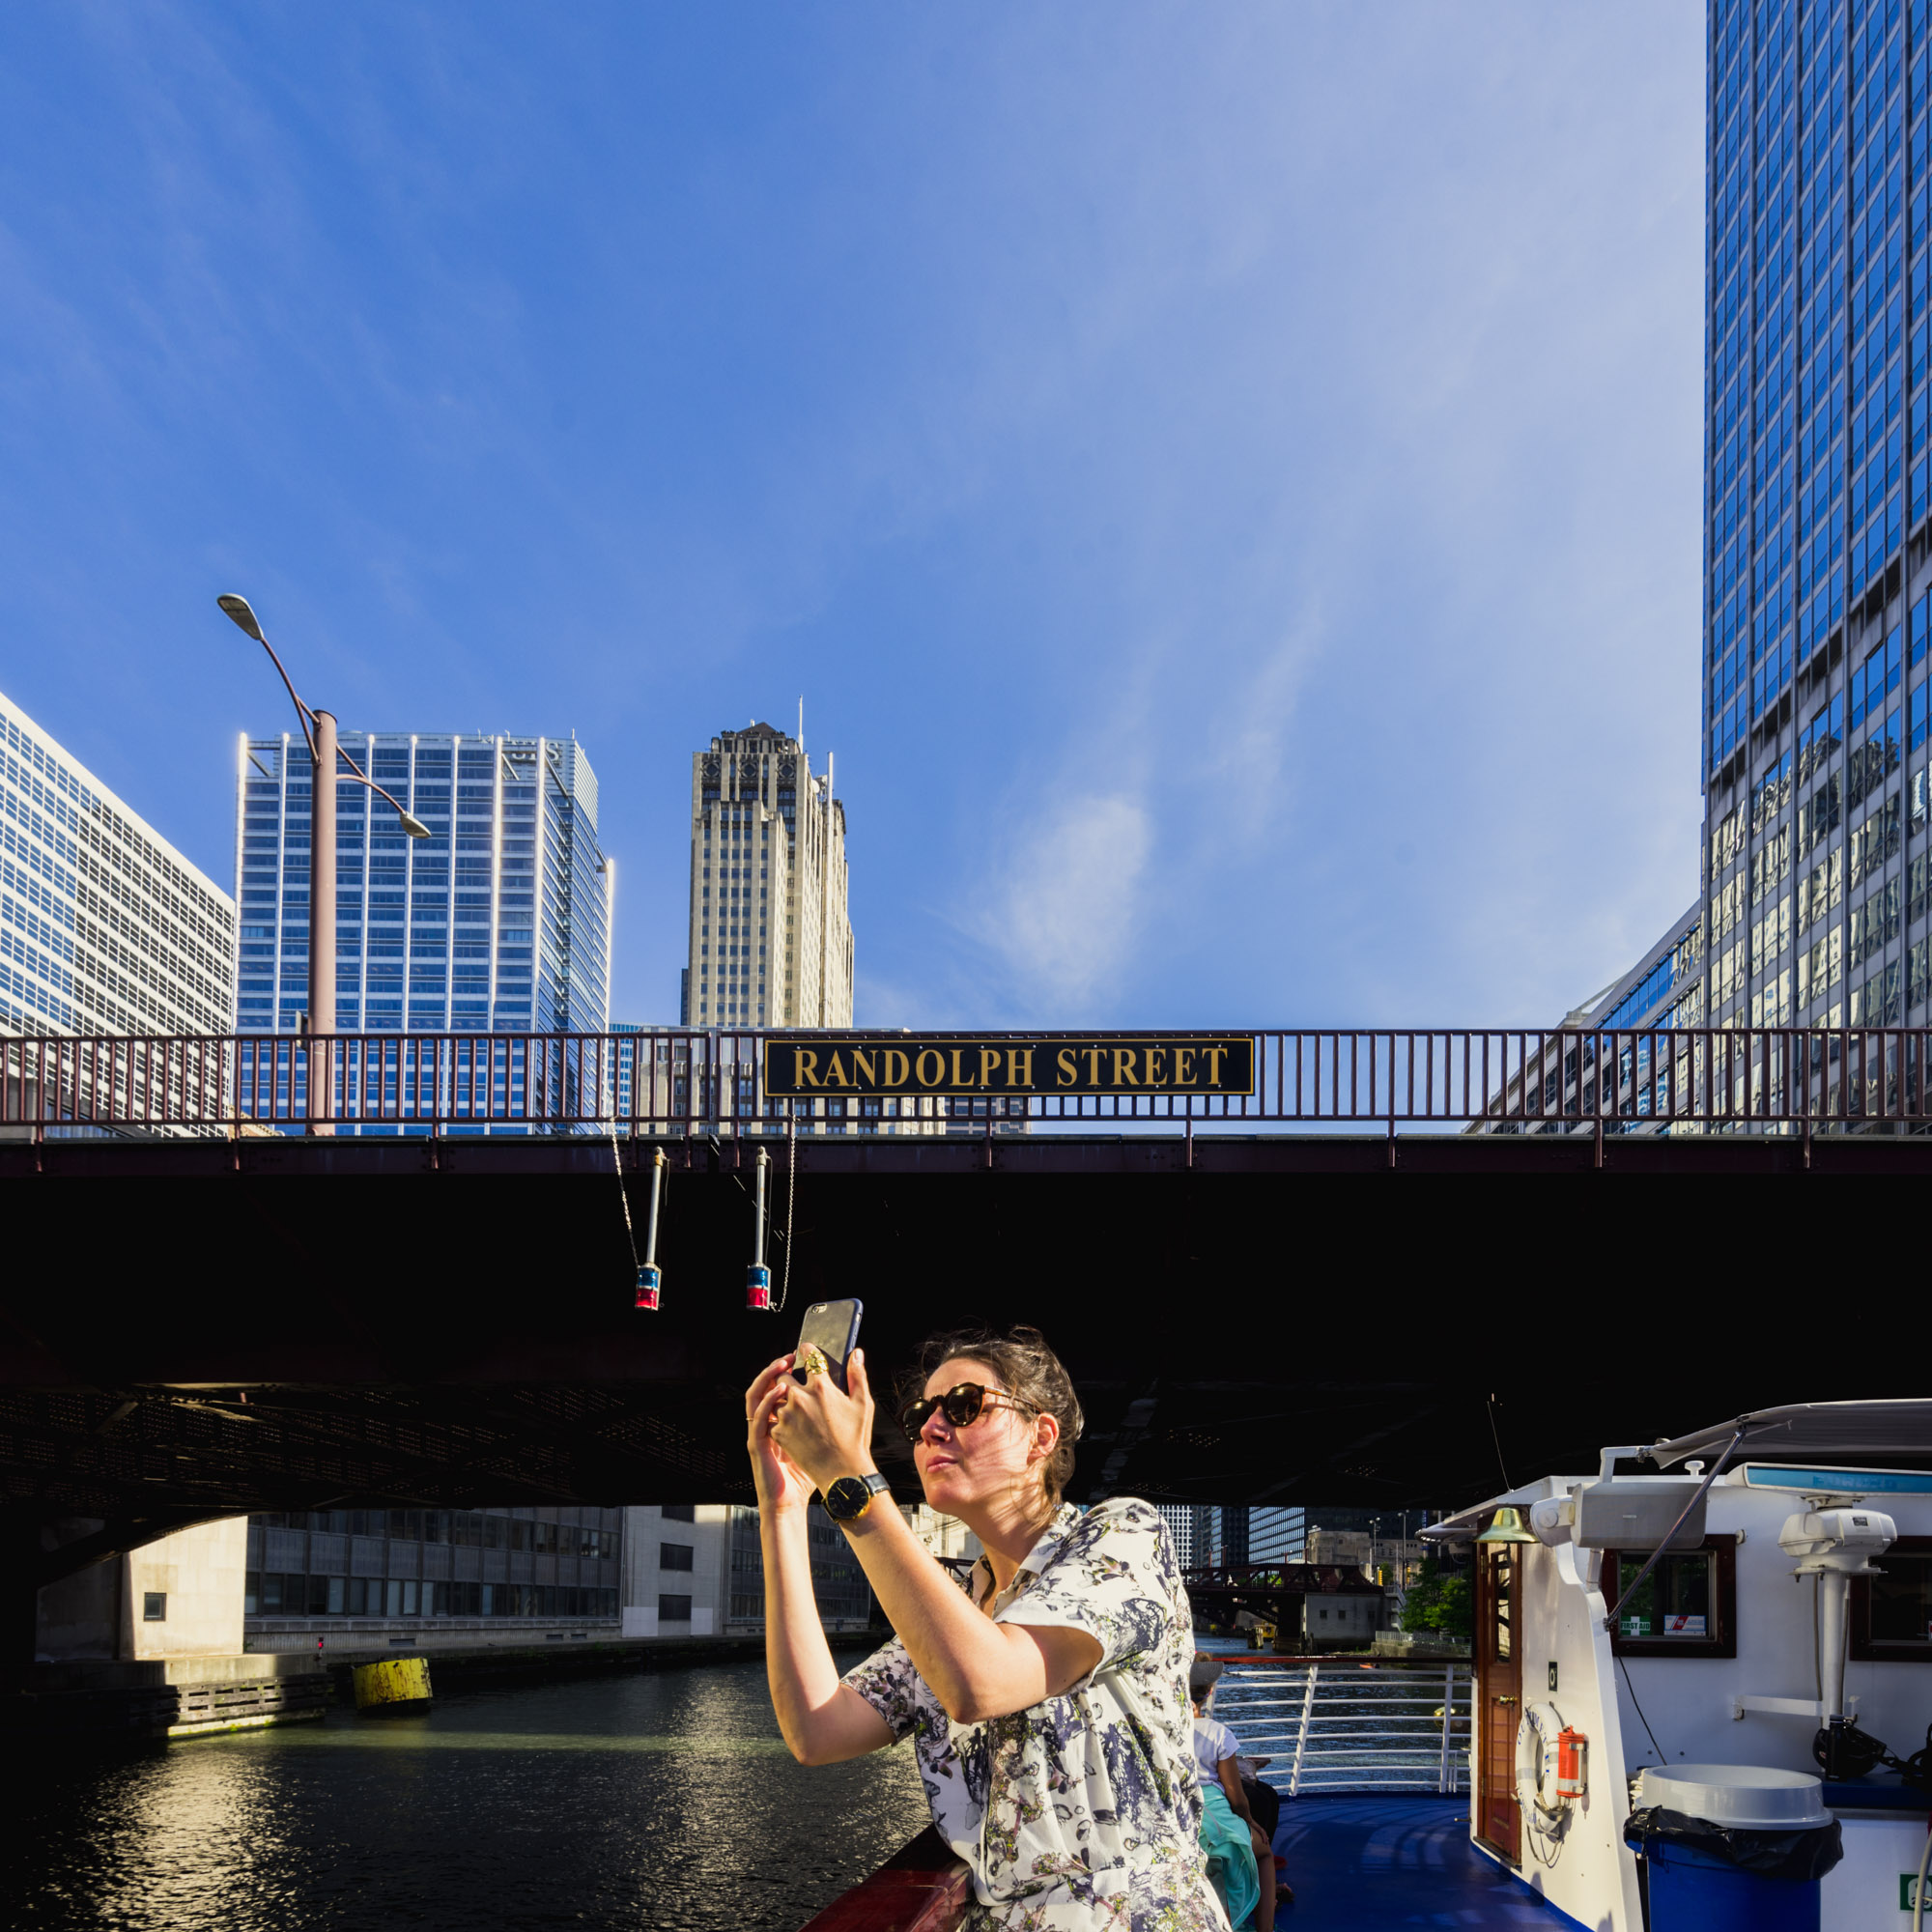 Jeff On The Road - Travel - Chicago - Chicago Architecture Foundation River Cruise - All photos are under Copyright © 2017 Jeff Frenette Photography / dezjeff. To use the photos, please contact me at dezjeff@me.com.